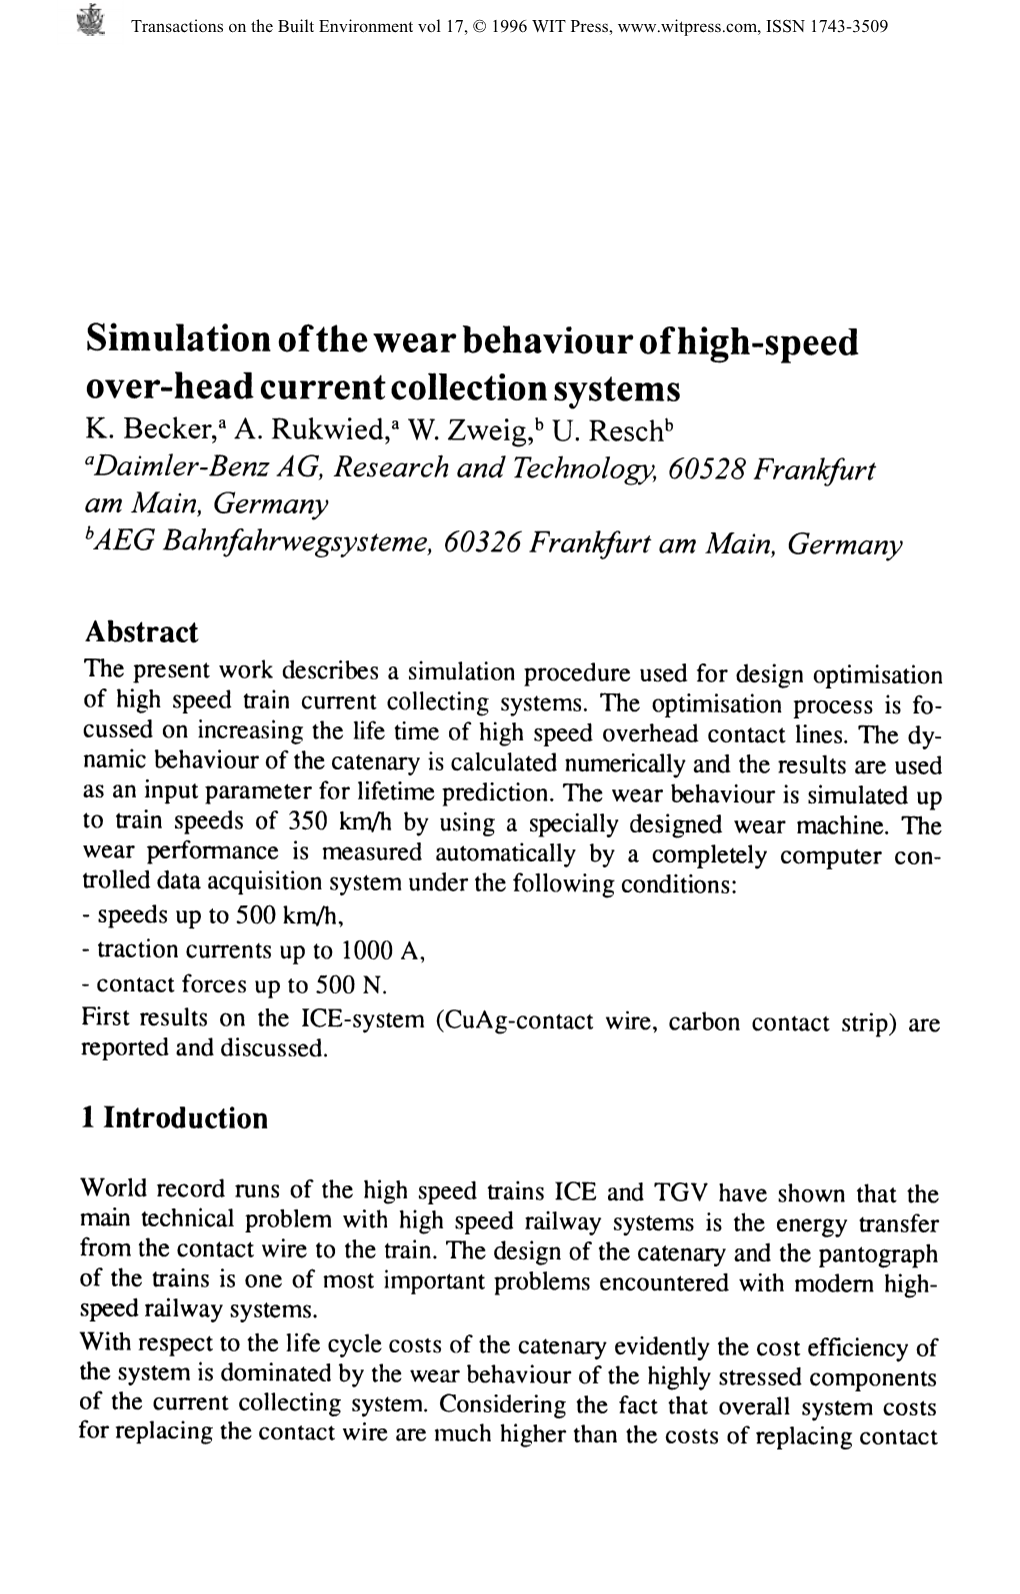 Simulation of the Wear Behaviour of High-Speed